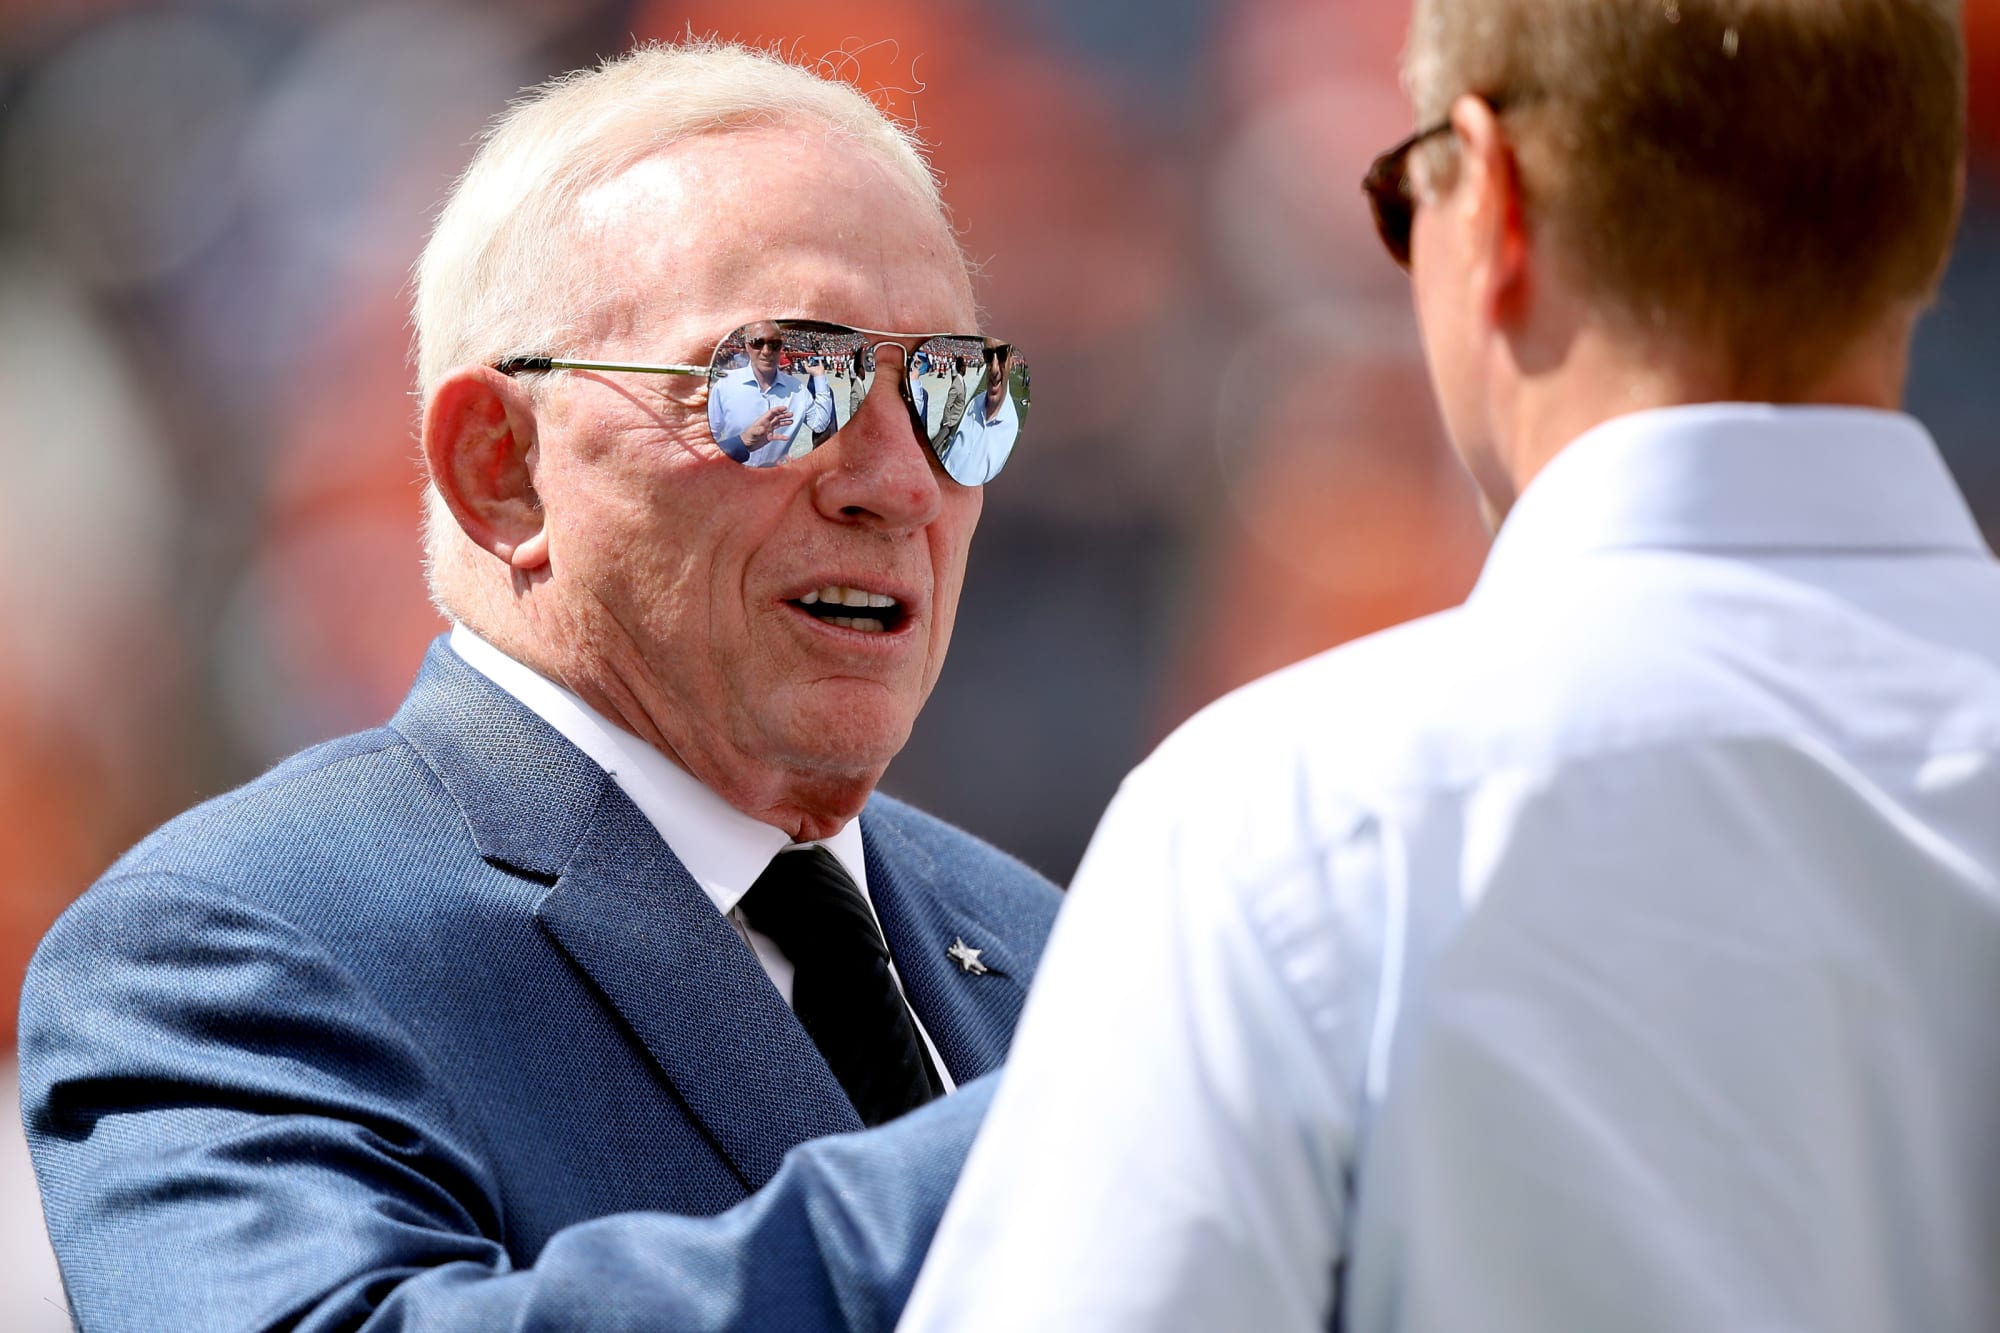 Why do Dallas Cowboys fans side with billionaire owner over the players?